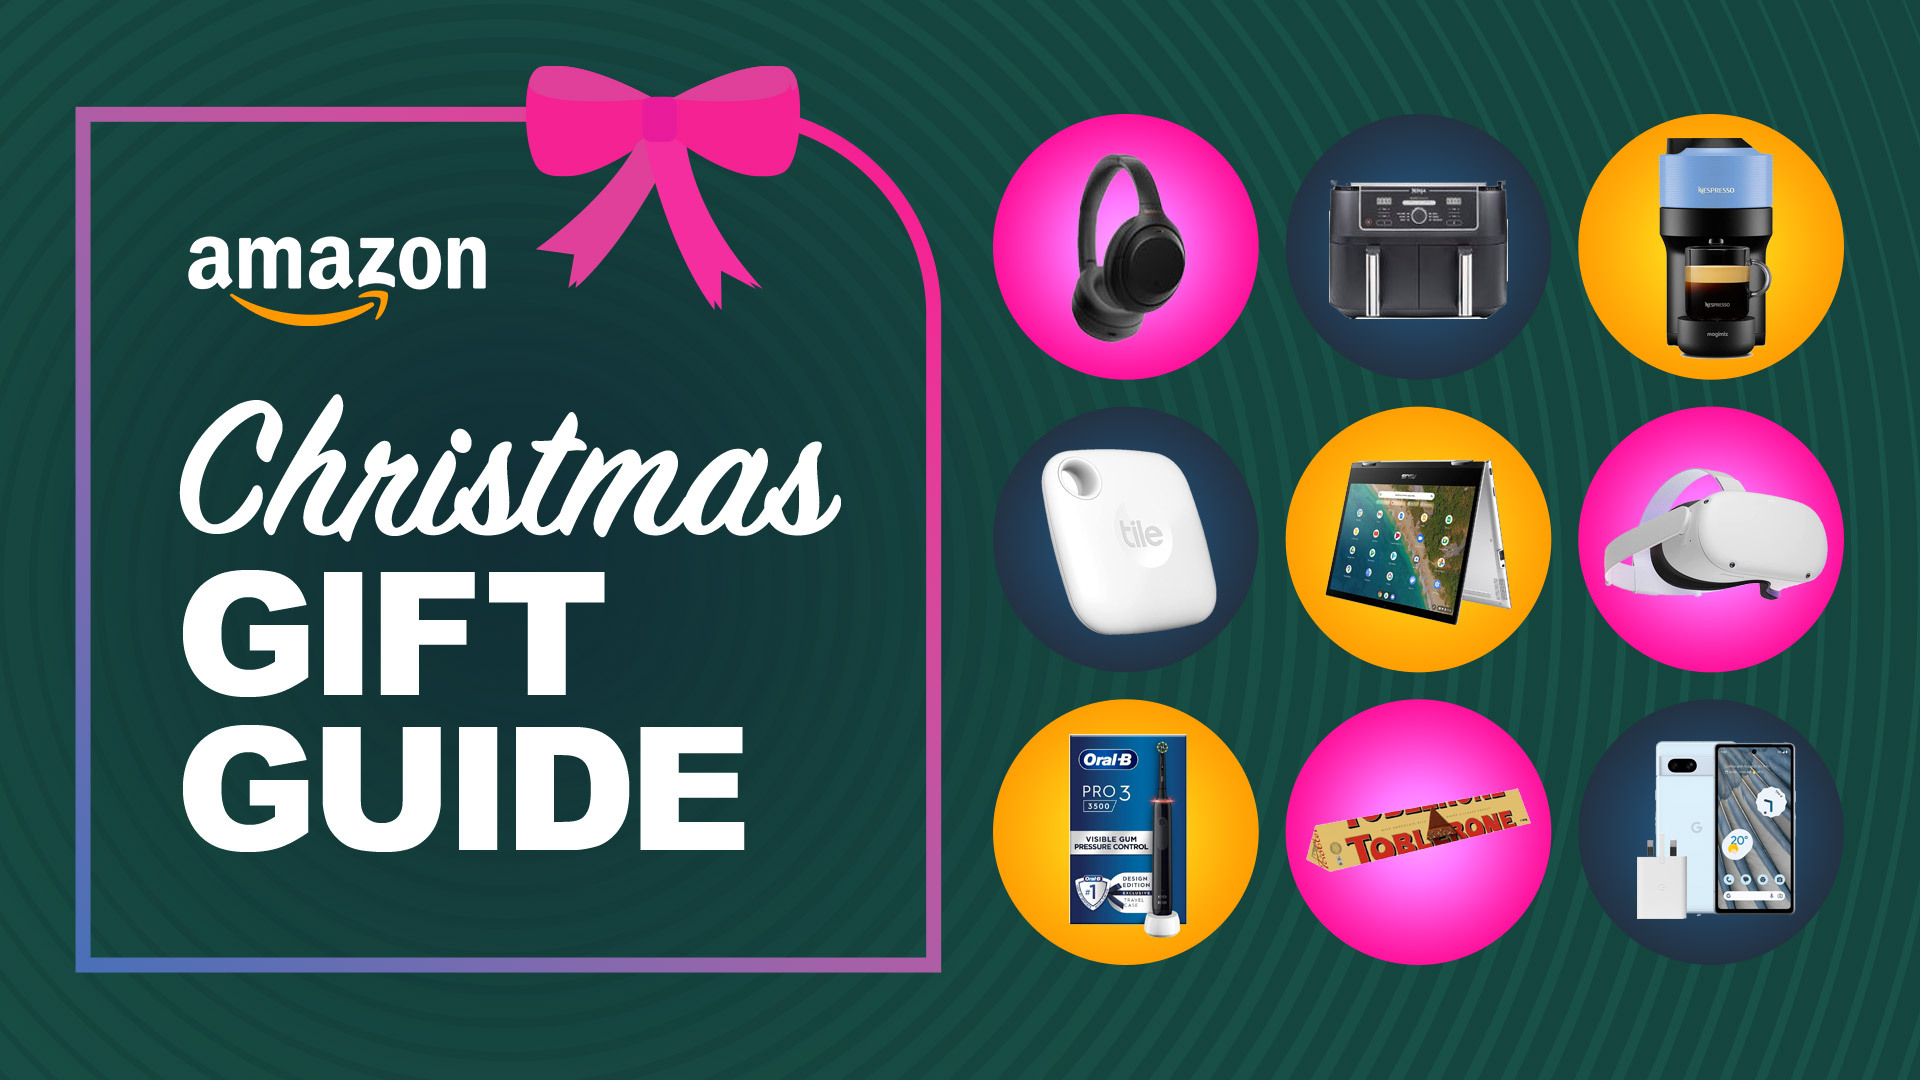 Amazon last minute Christmas sale is live in the UK - shop the 18 best deals